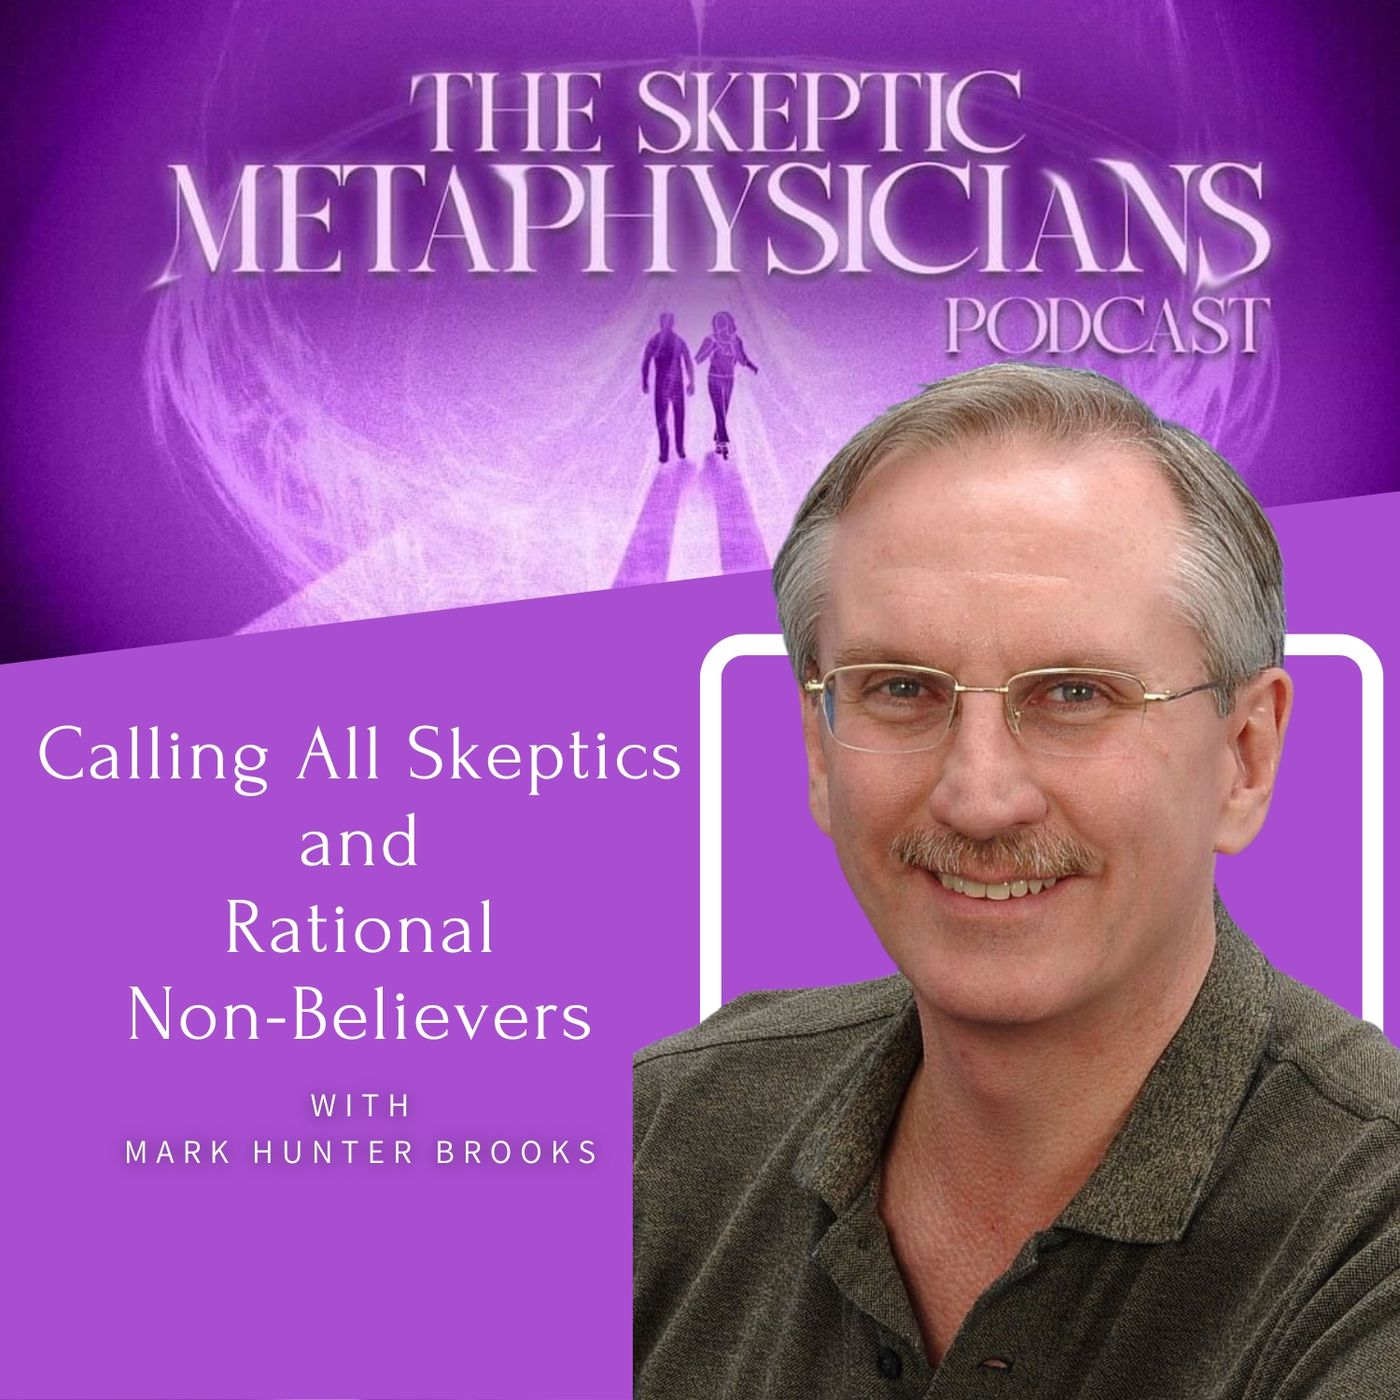 Calling All Skeptics and Rational Non-Believers